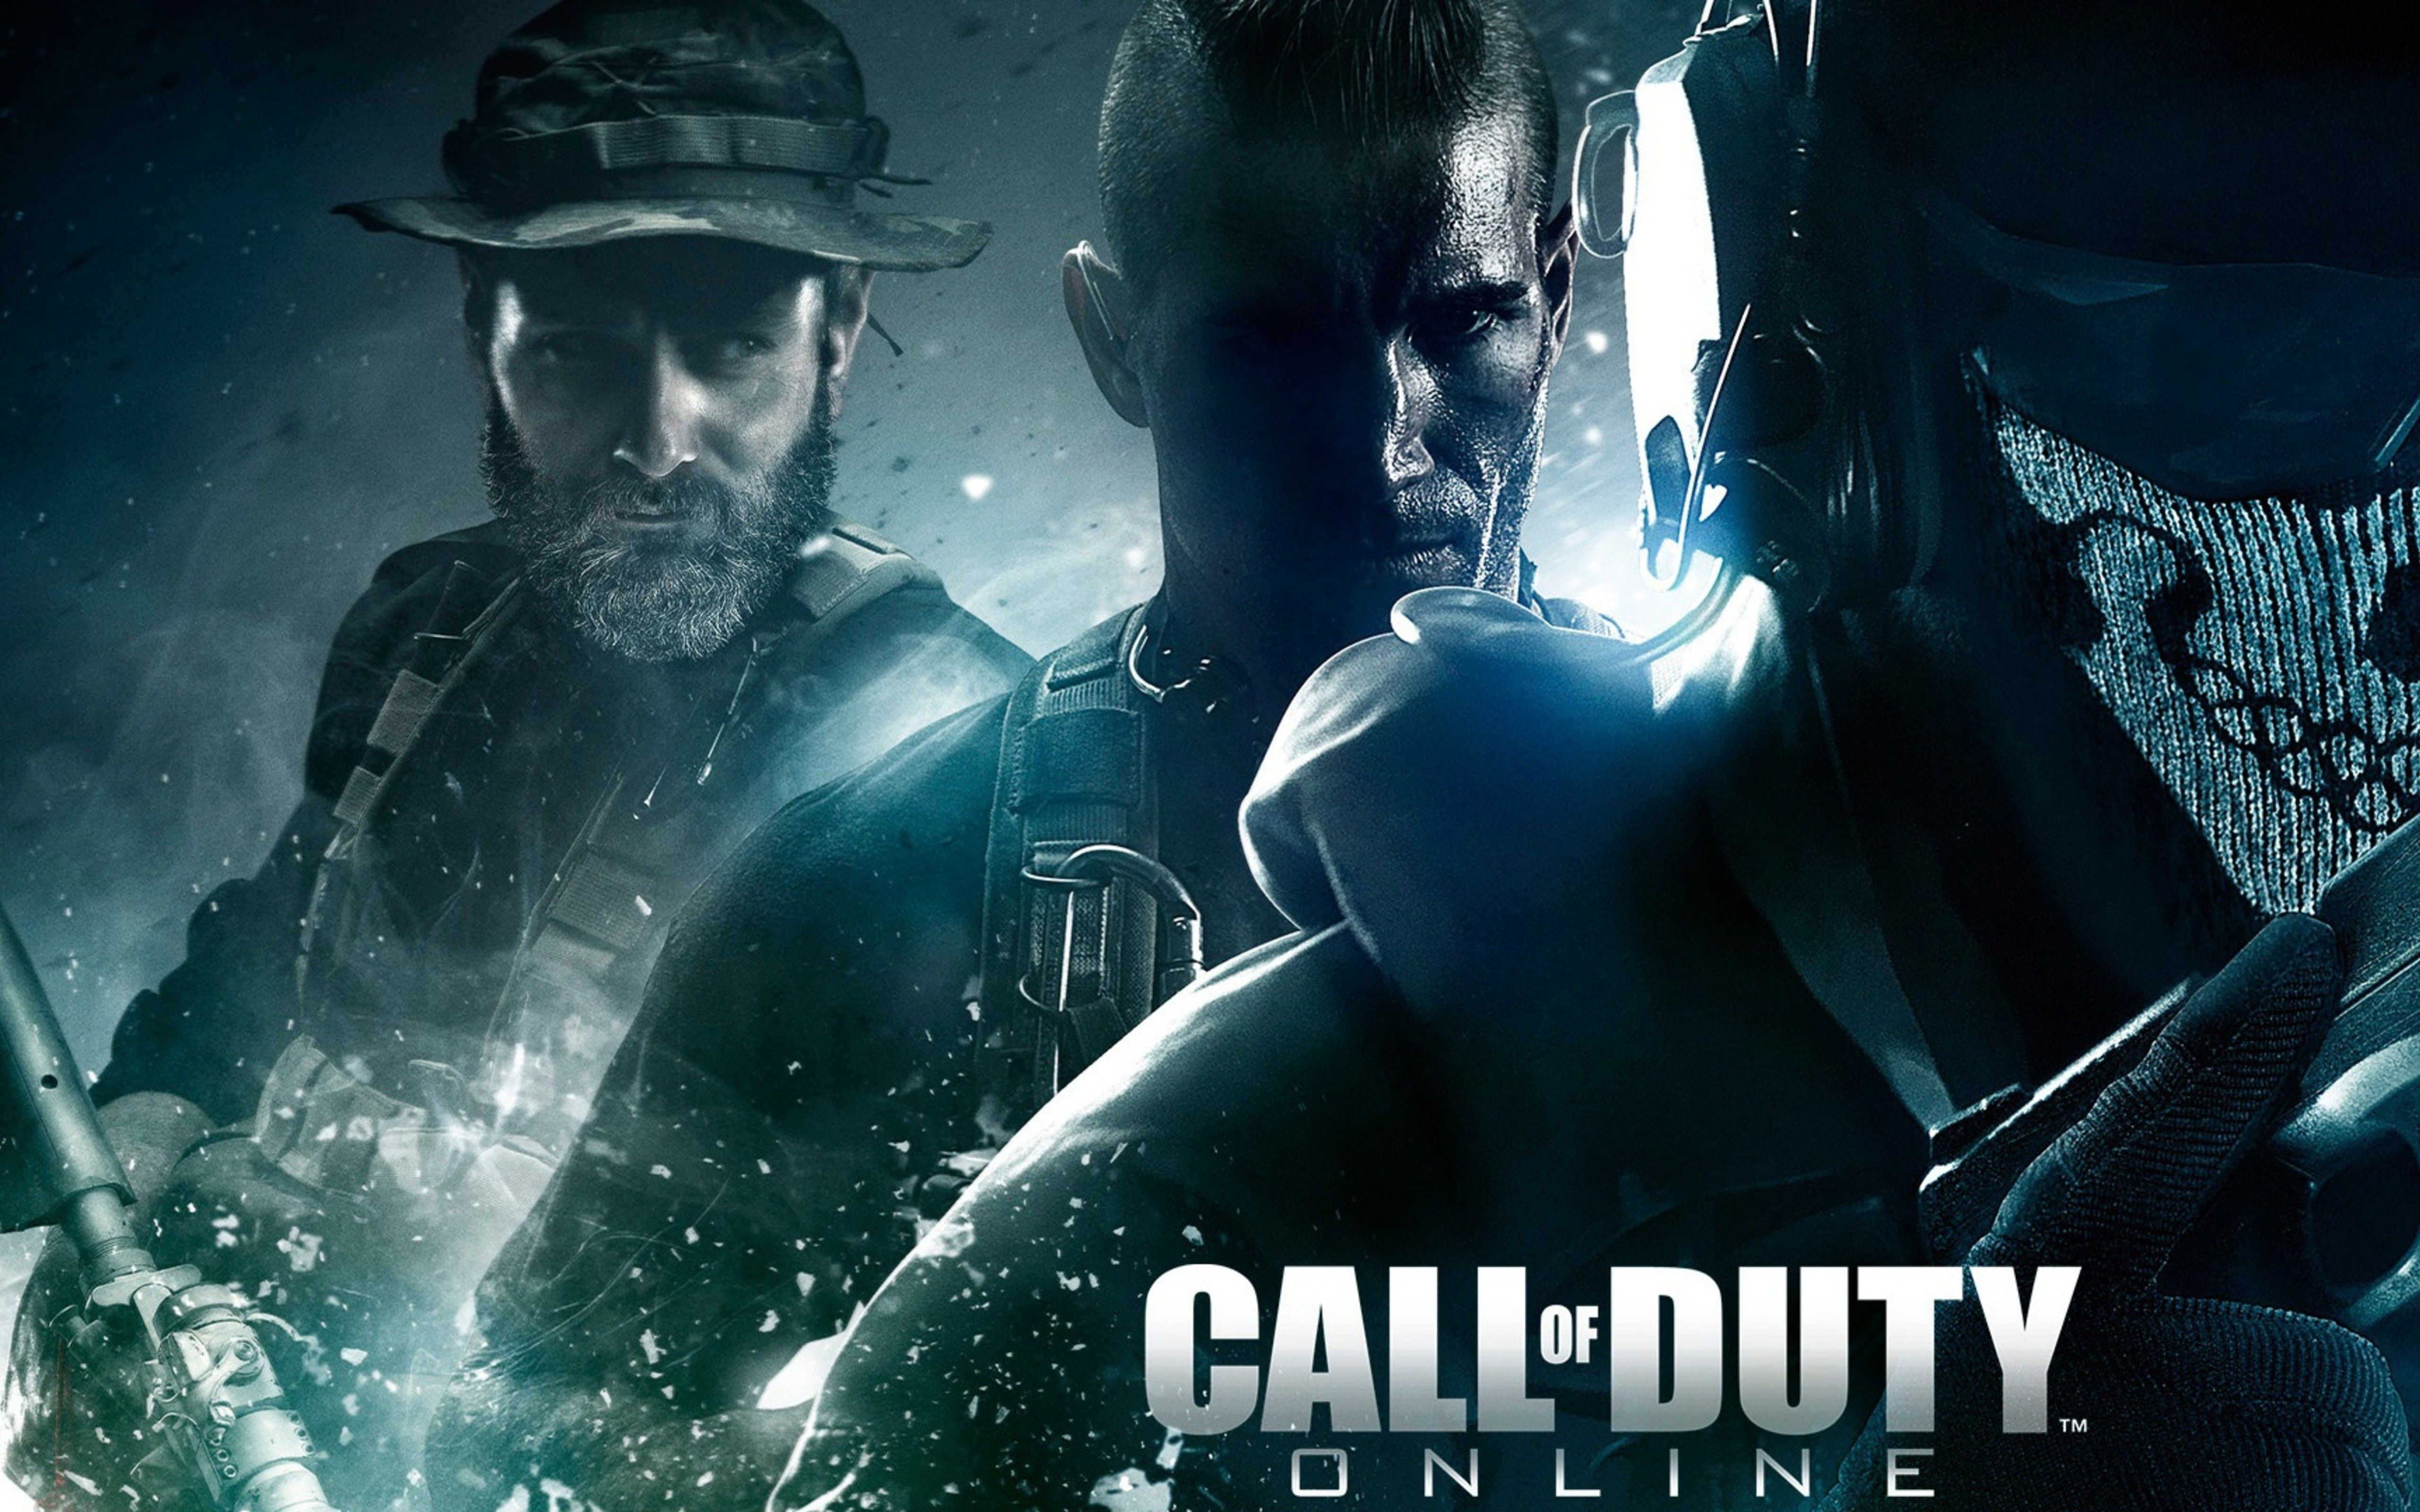 Call of Duty poster